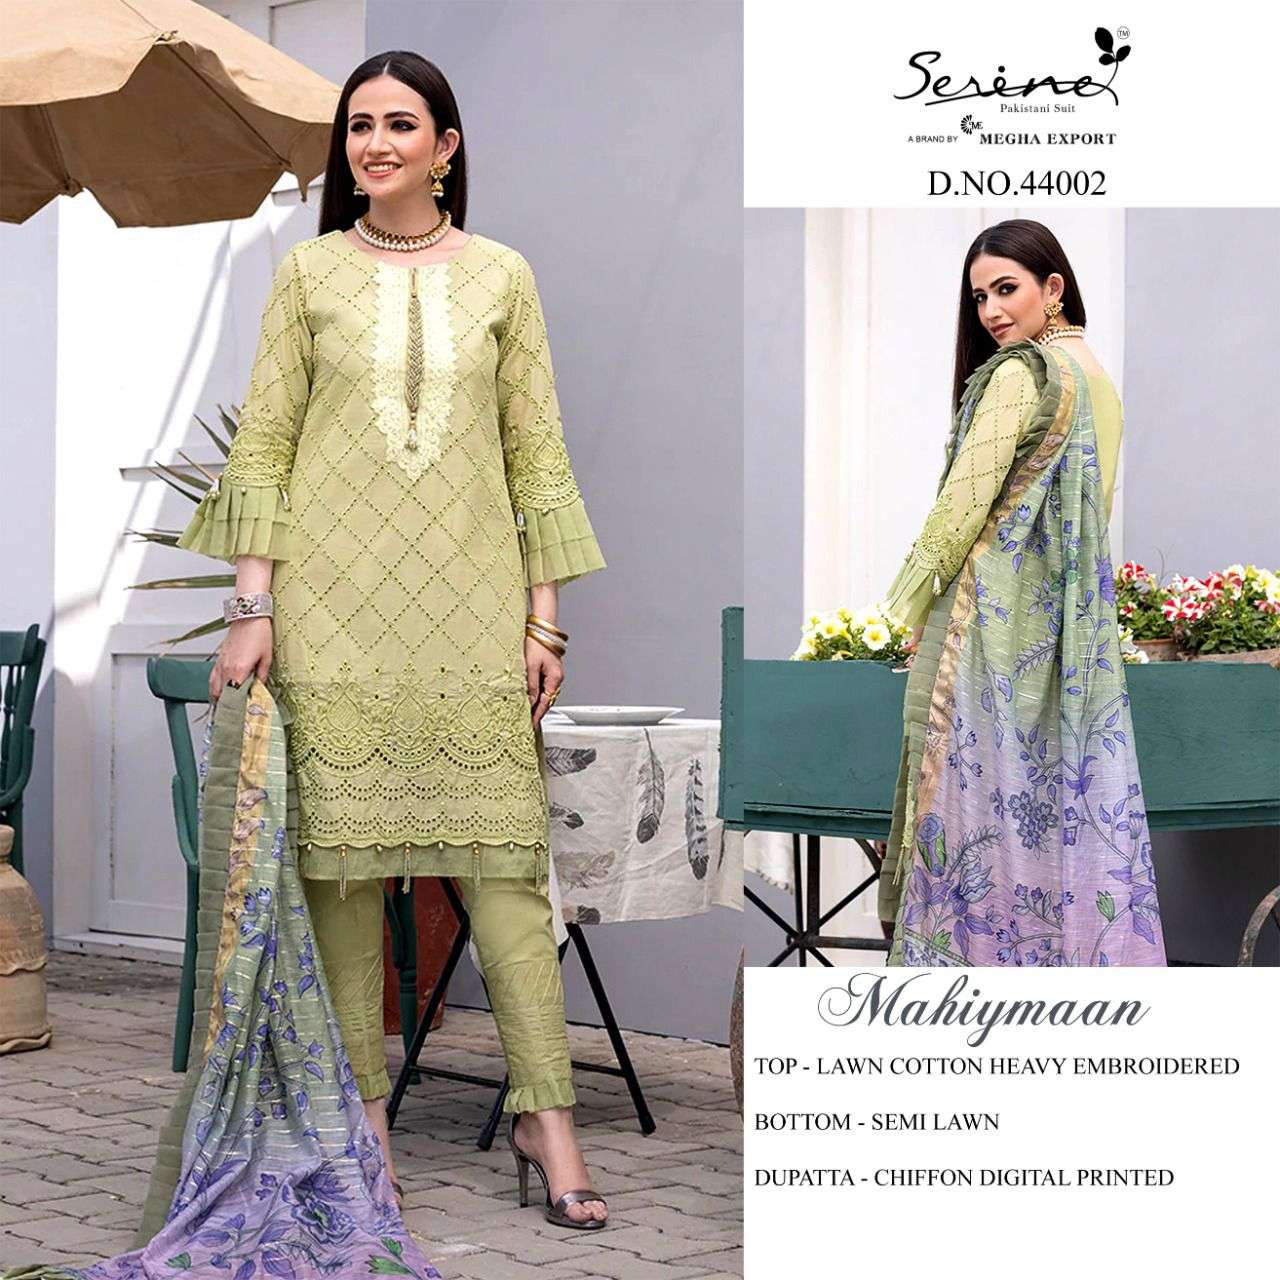 SERENE PRESENT MAHIYMAAN LAWN EMBROIDERED PAKISTANI DESIGNER SUITS IN WHOLESALE PRICE IN SURAT - SAI DRESSES